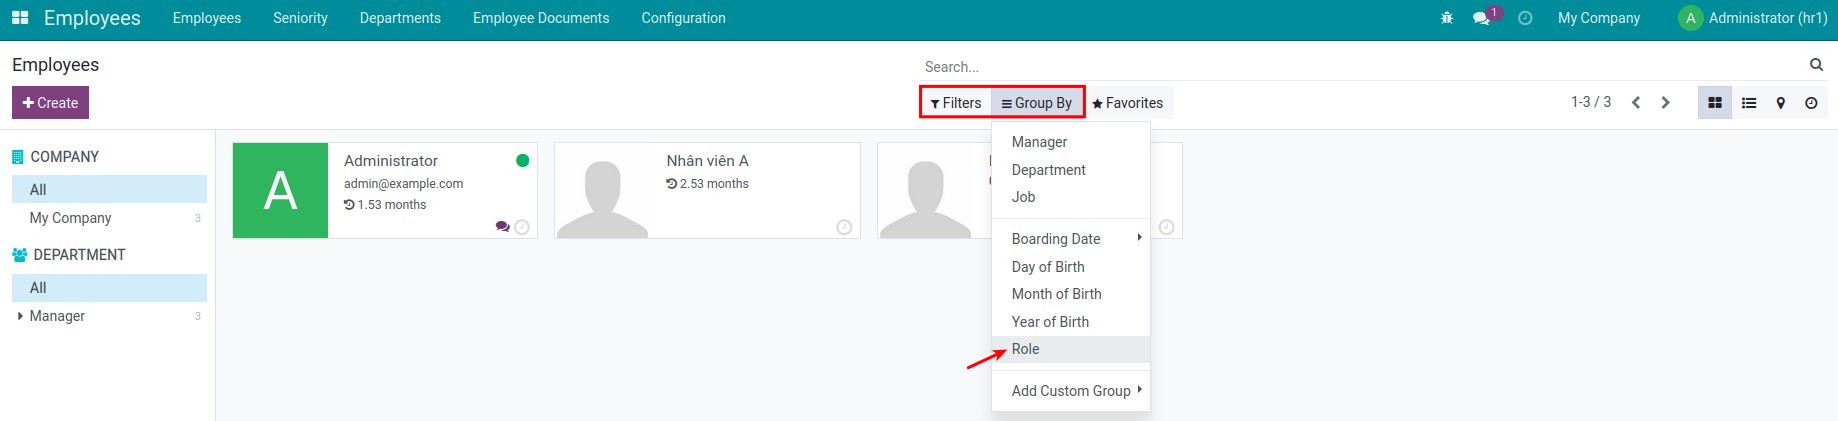 Search, filter/group employees by roles